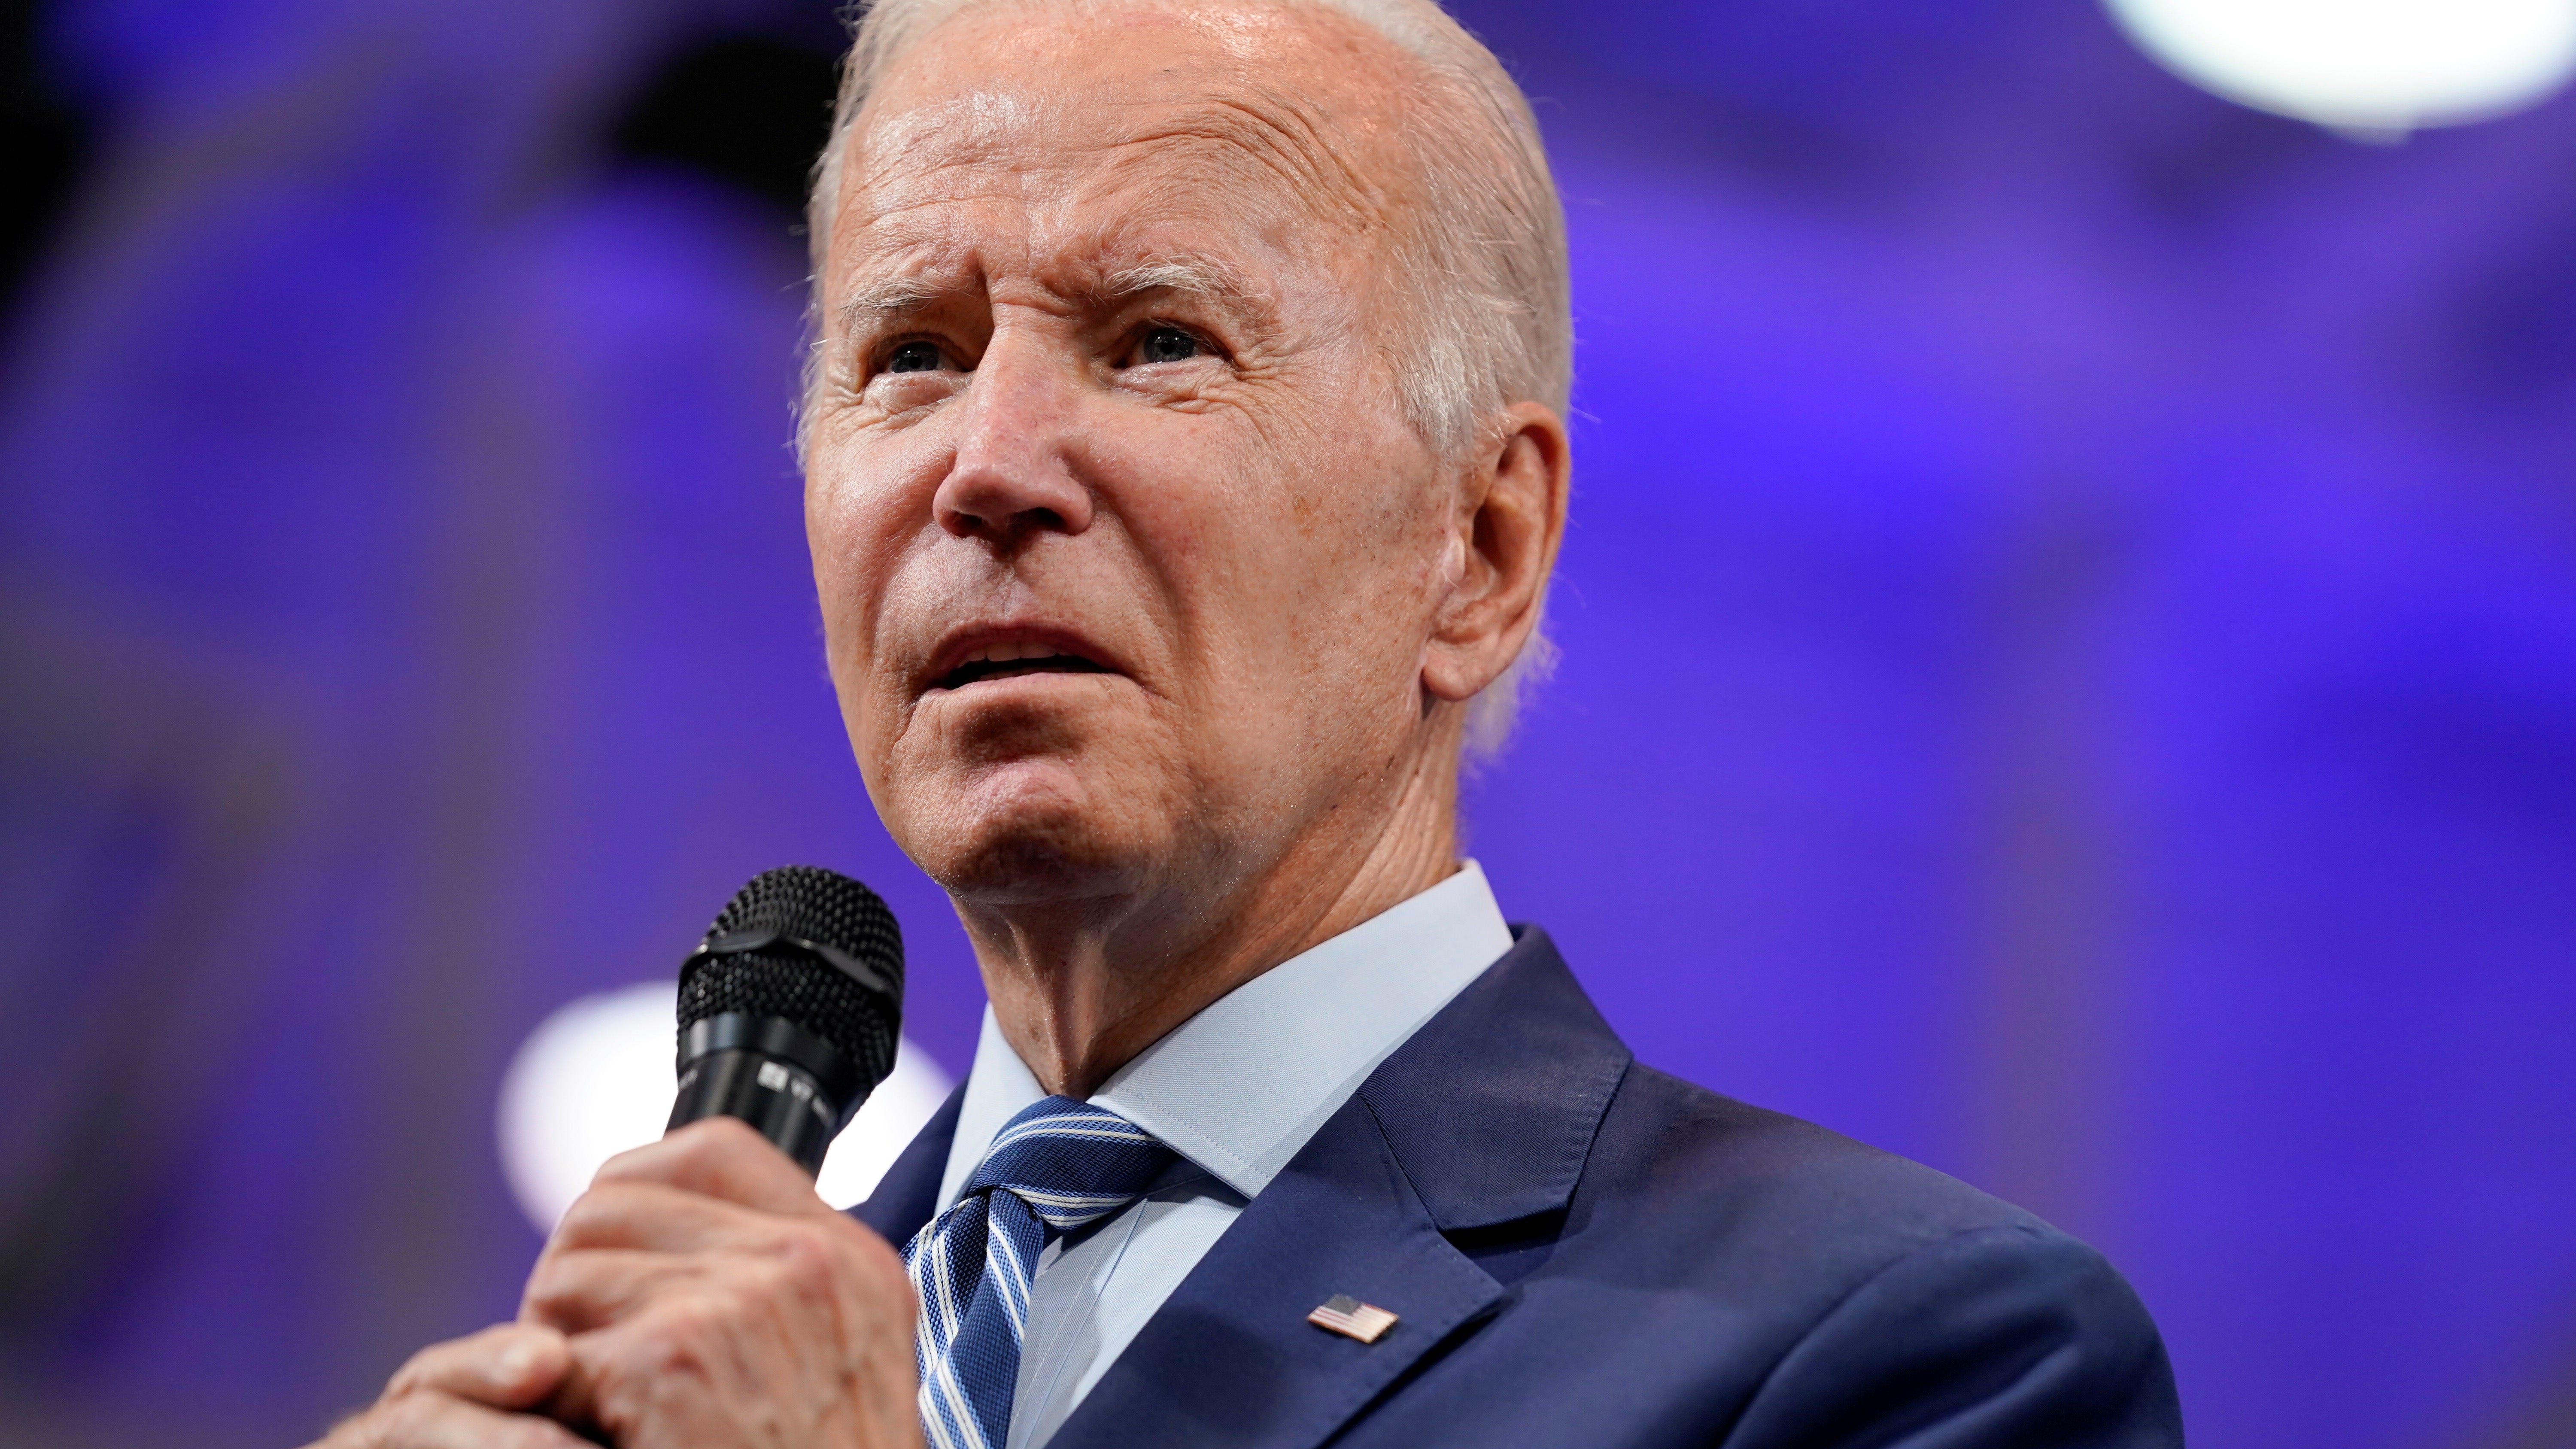 Biden Shoots Down Supreme Court Expansion Says Court Could Be Politicized In Way That Is Not